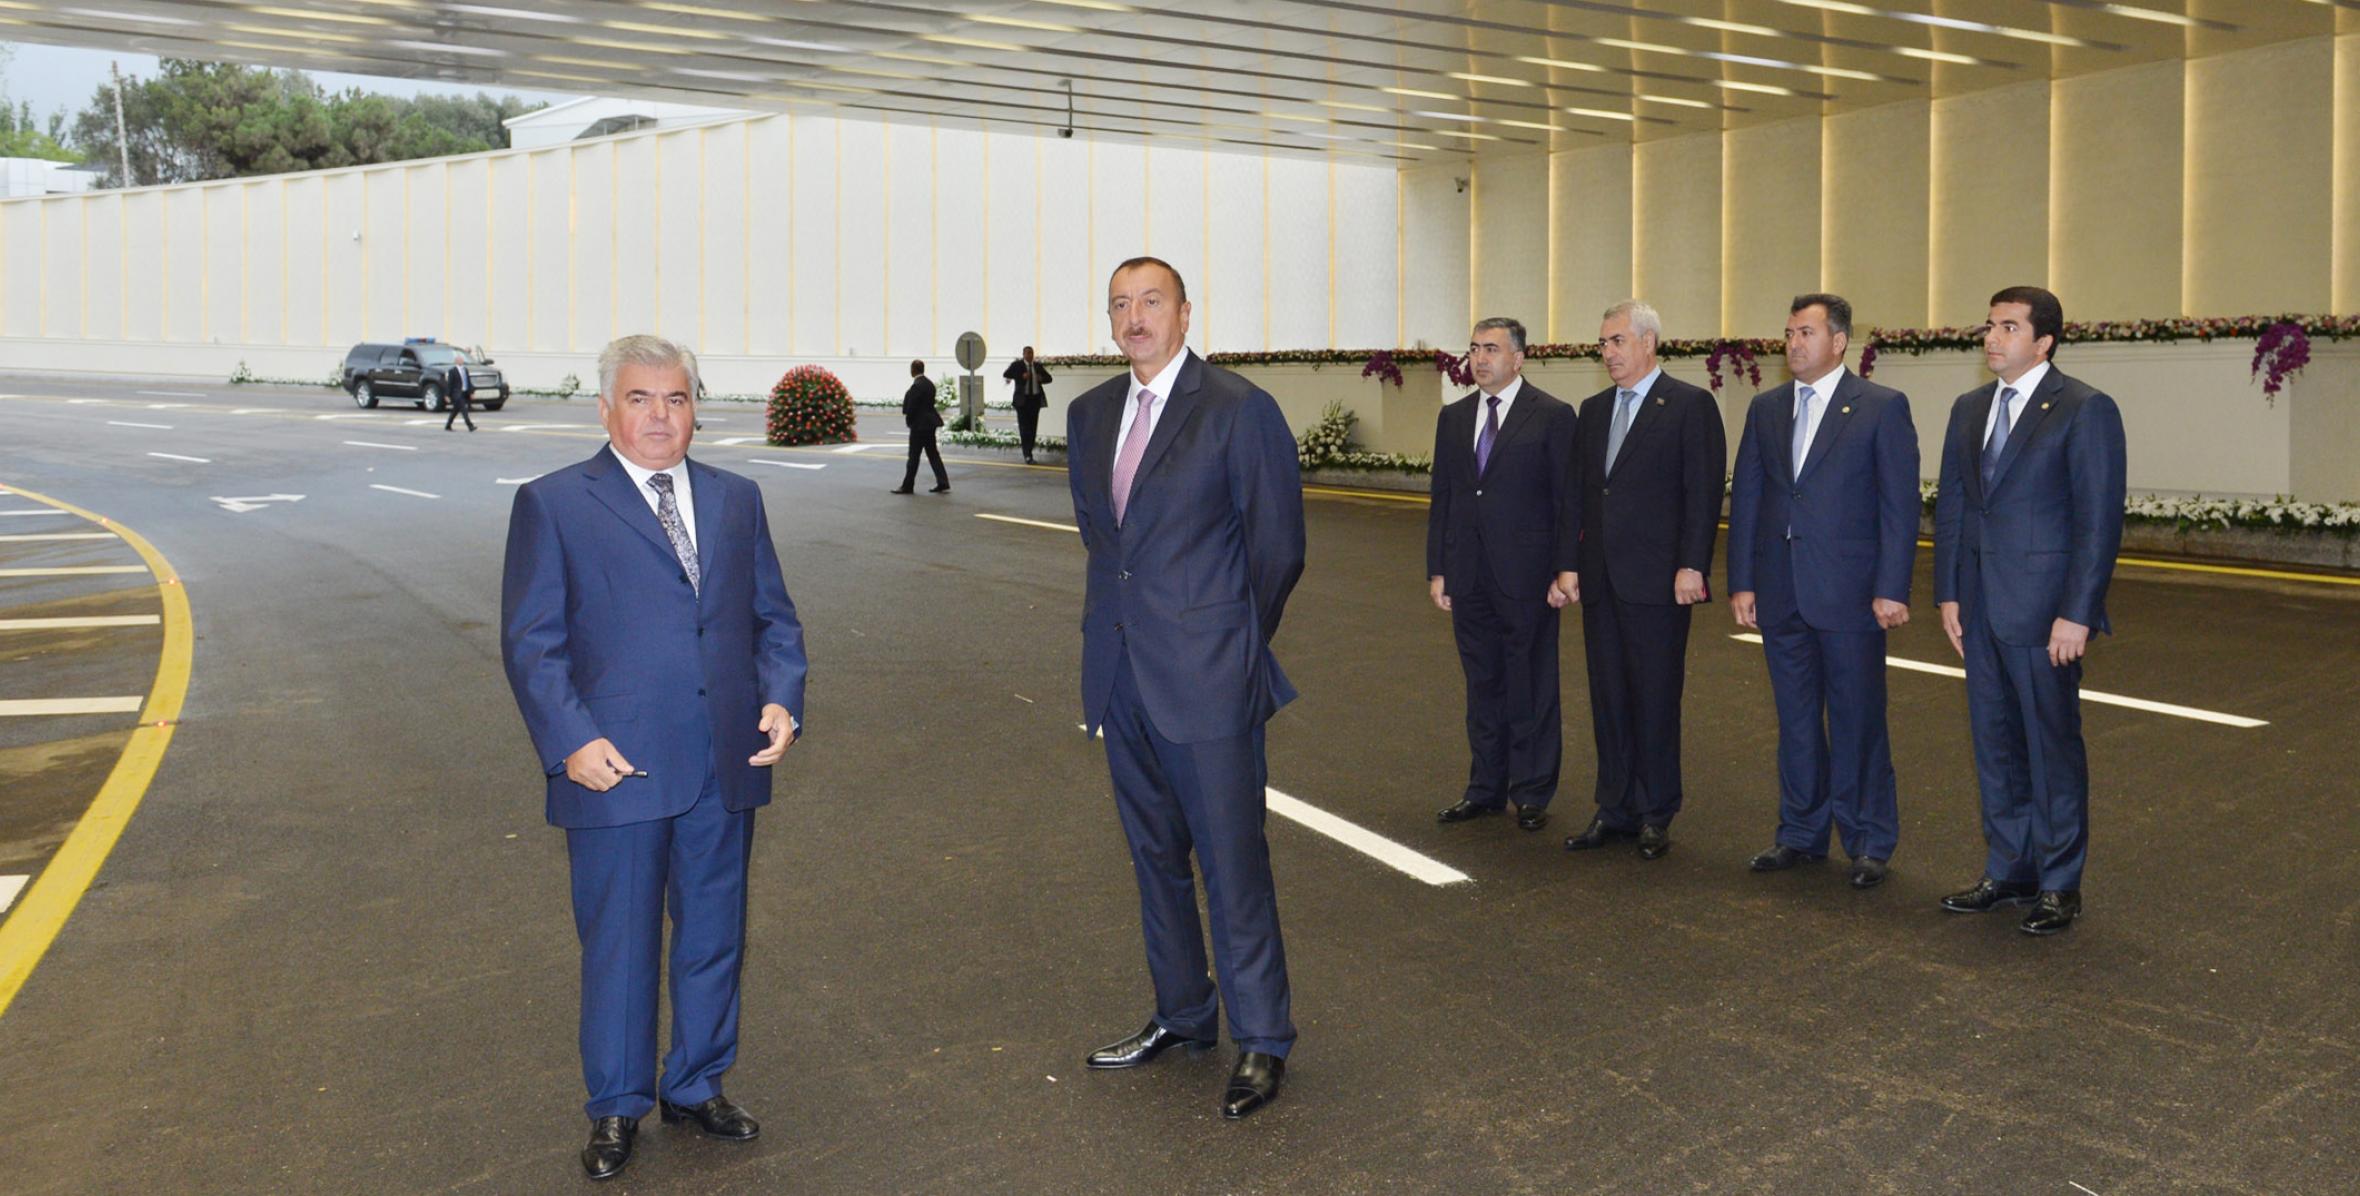 Ilham Aliyev attended a ceremony to open five tunnels built in Baku as part of the “Victory Square” project of a multi-level tunnel-type road junction